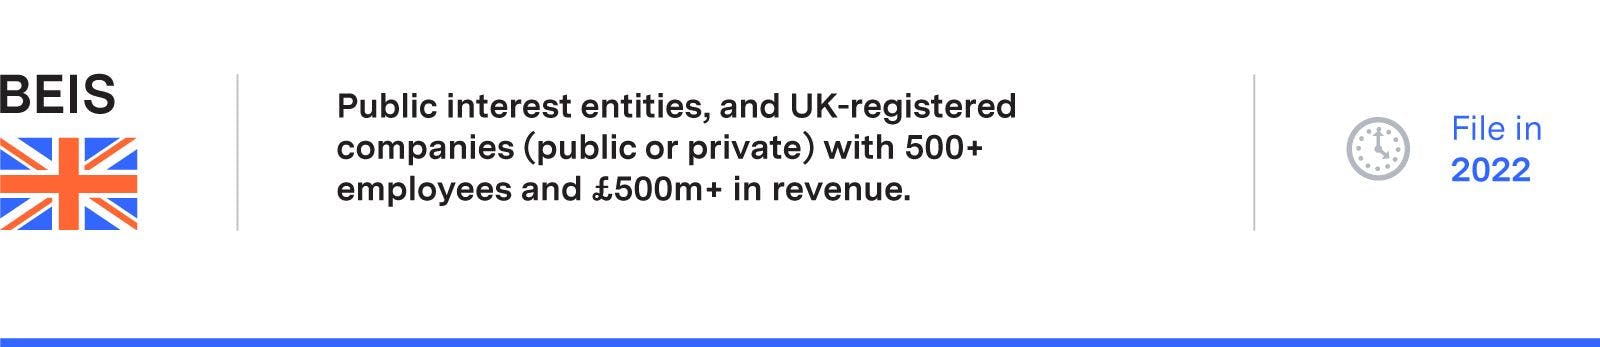 BEIS requirement: Public interest entities, and UK-registered companies (public or private) with 500+ employees and £500m+ in revenue. File in 2022.